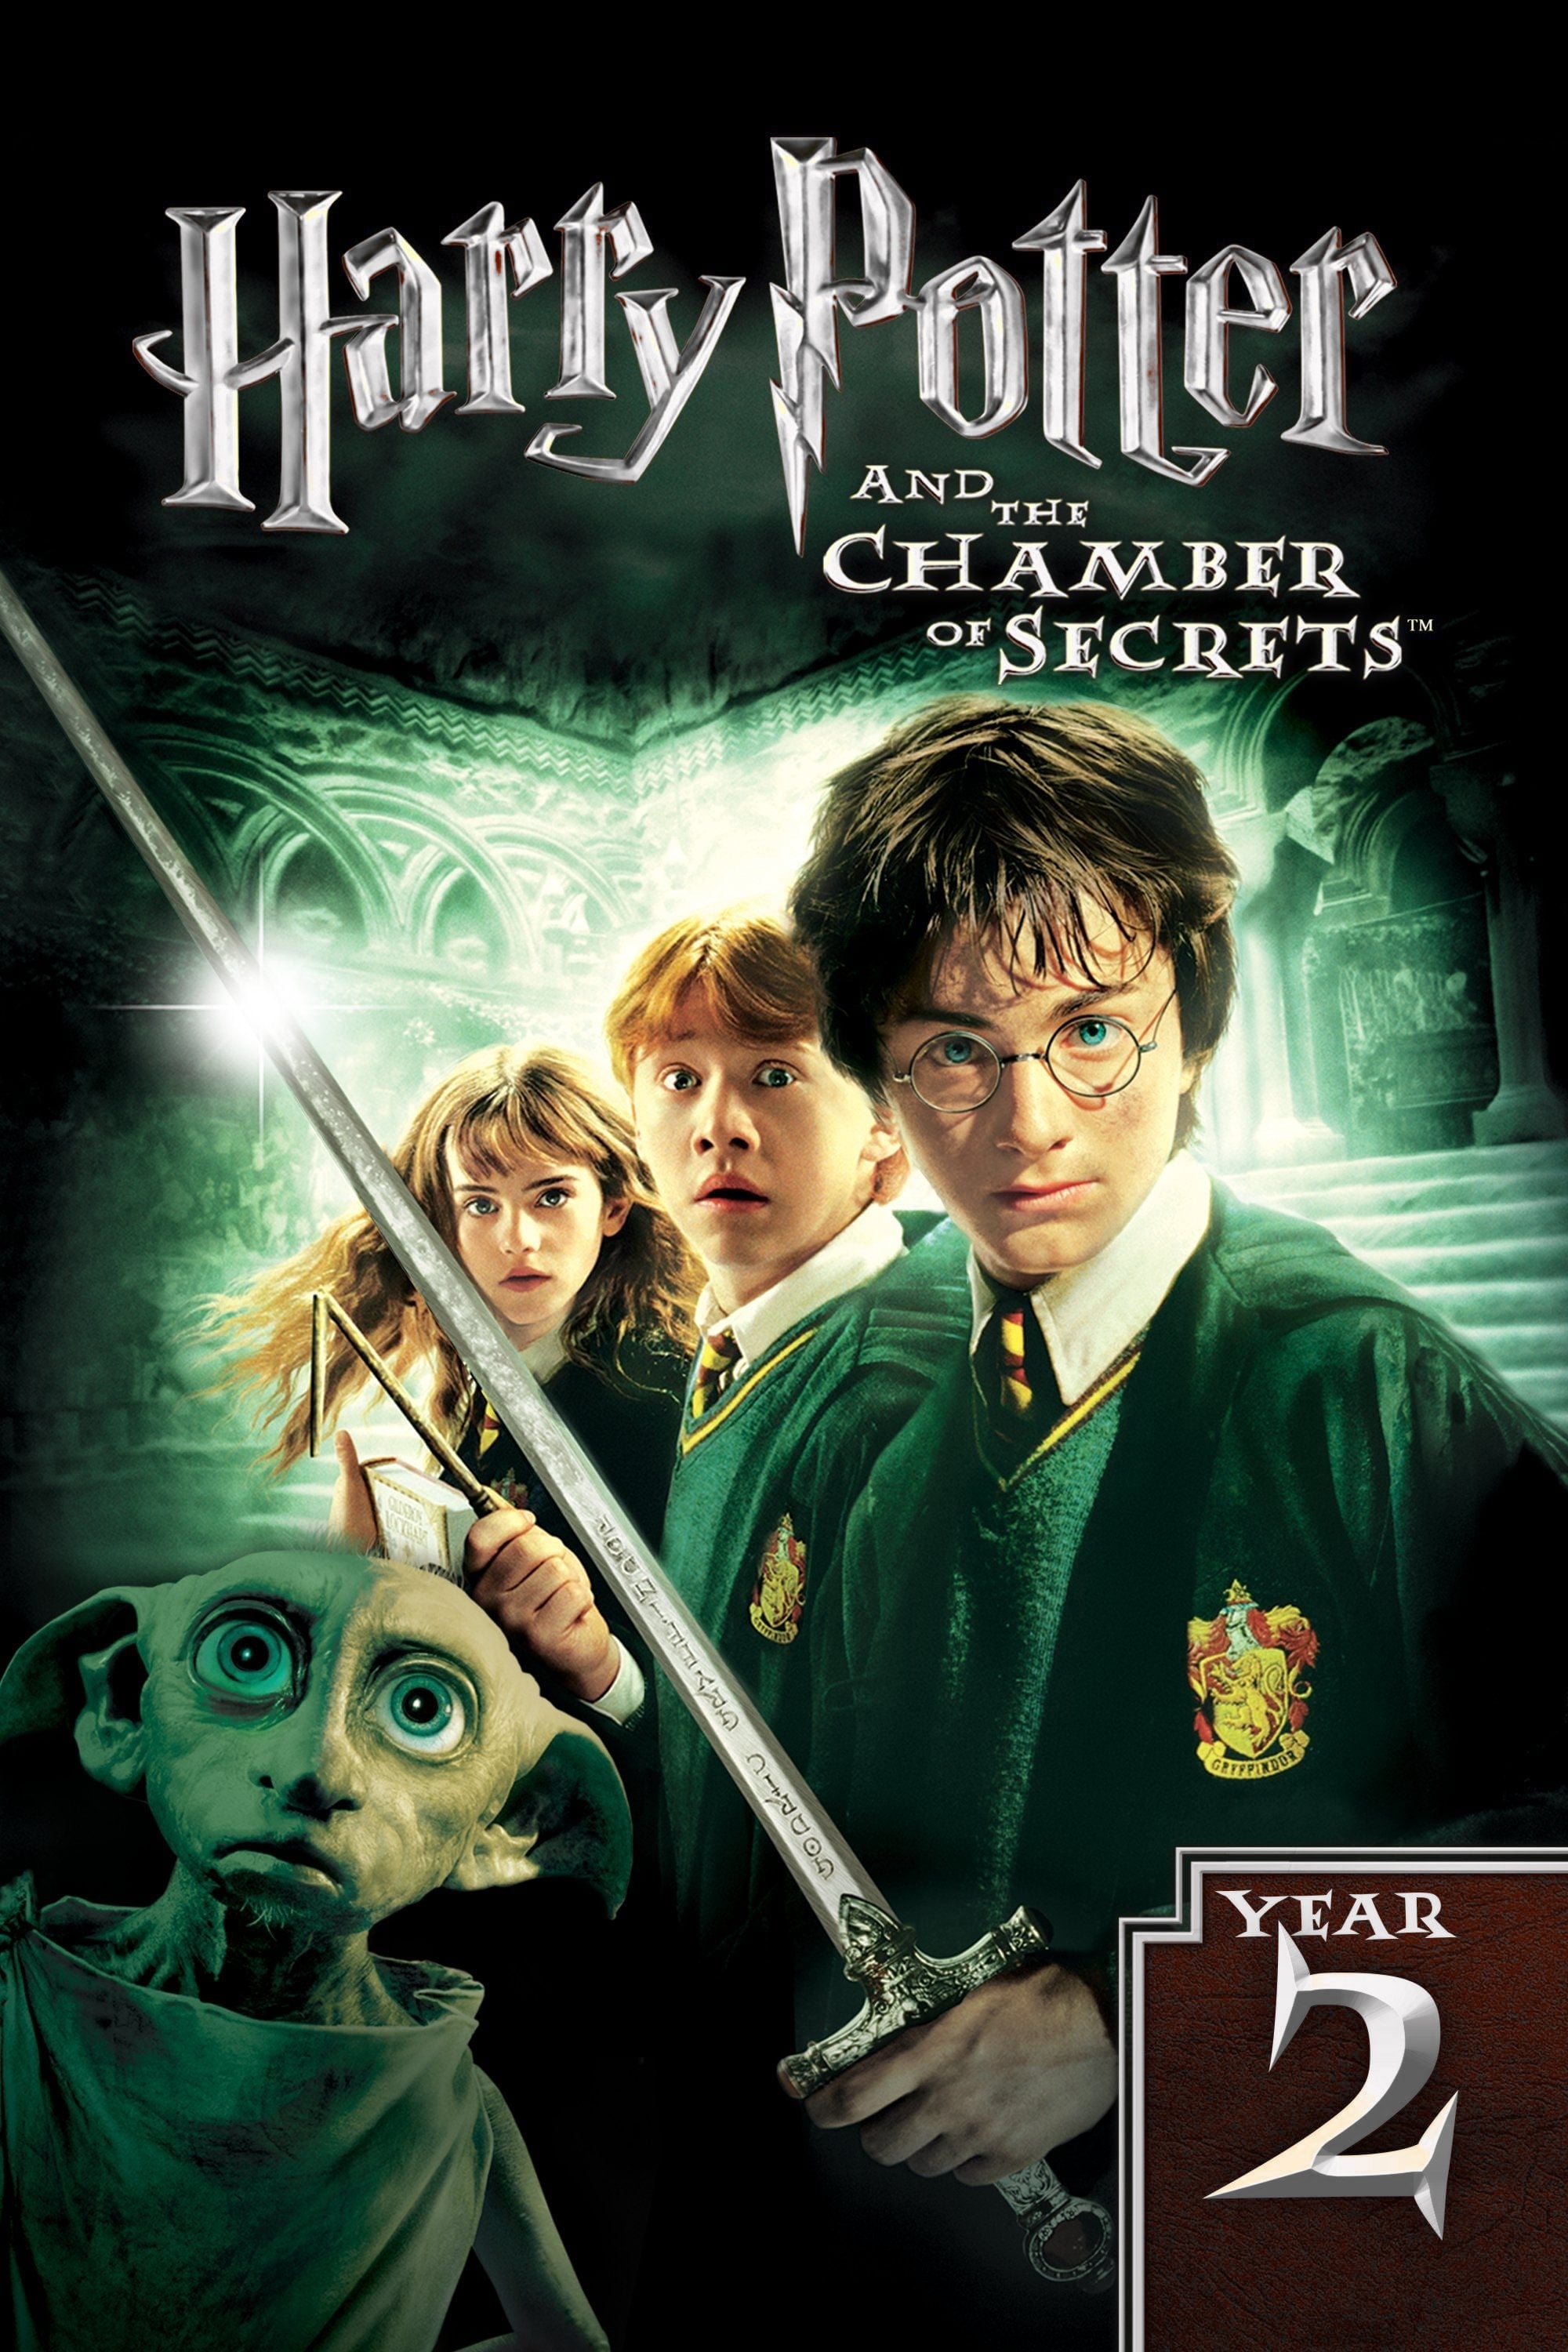 movie review harry potter and the chamber of secrets